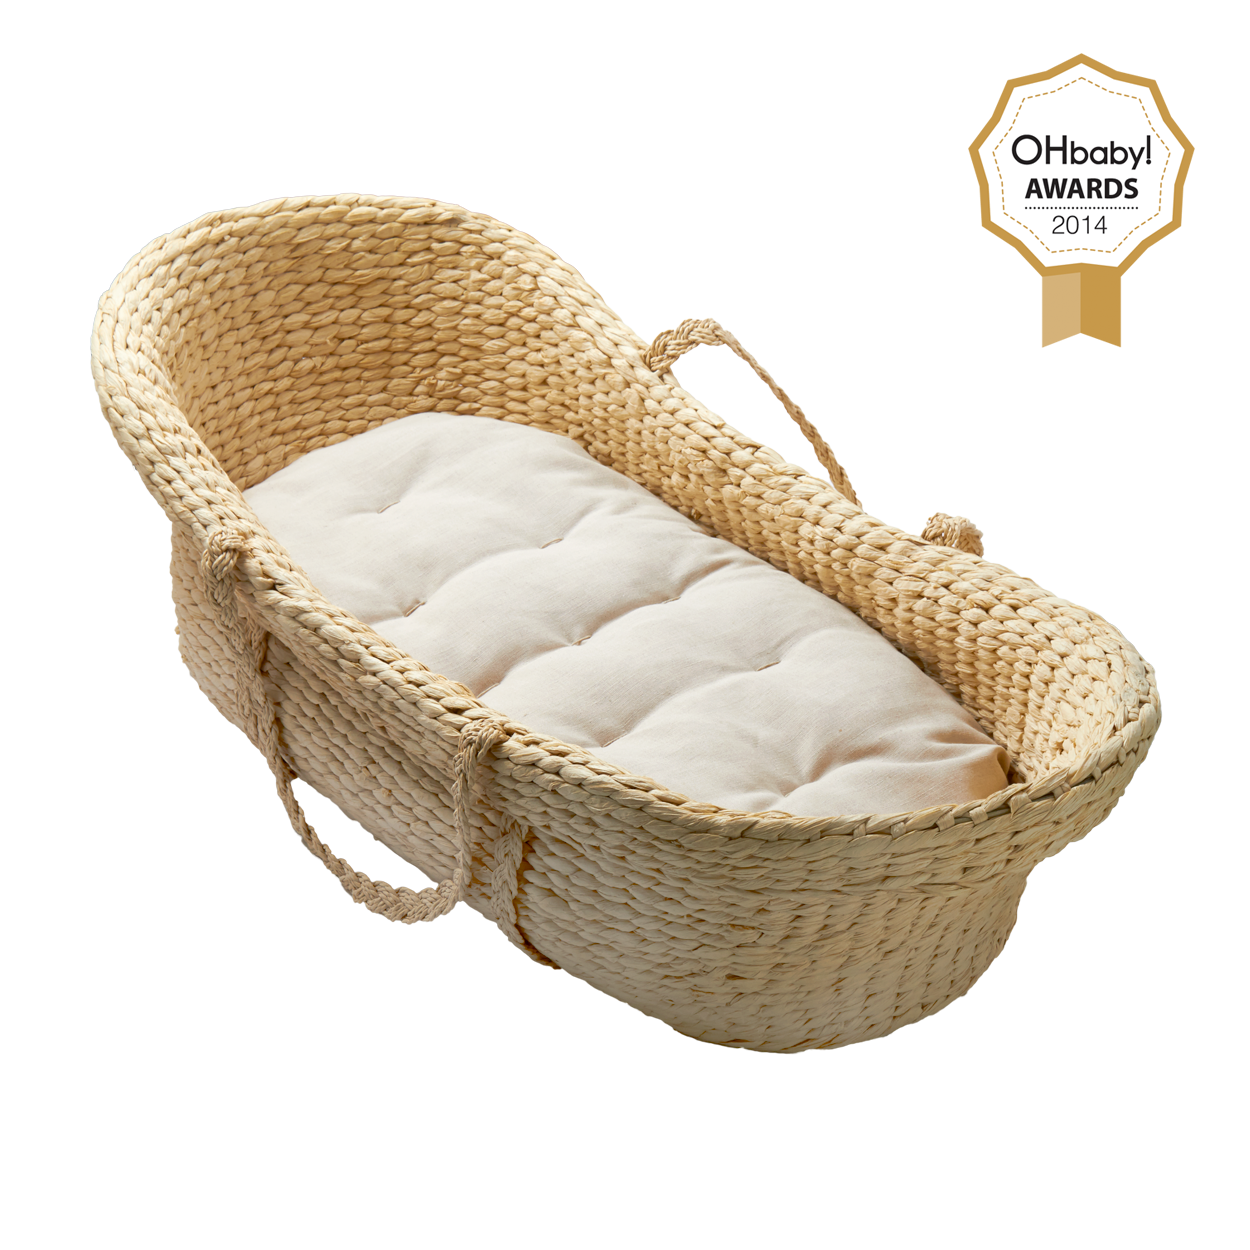 Newborn Baby Basket PNG High Quality Image